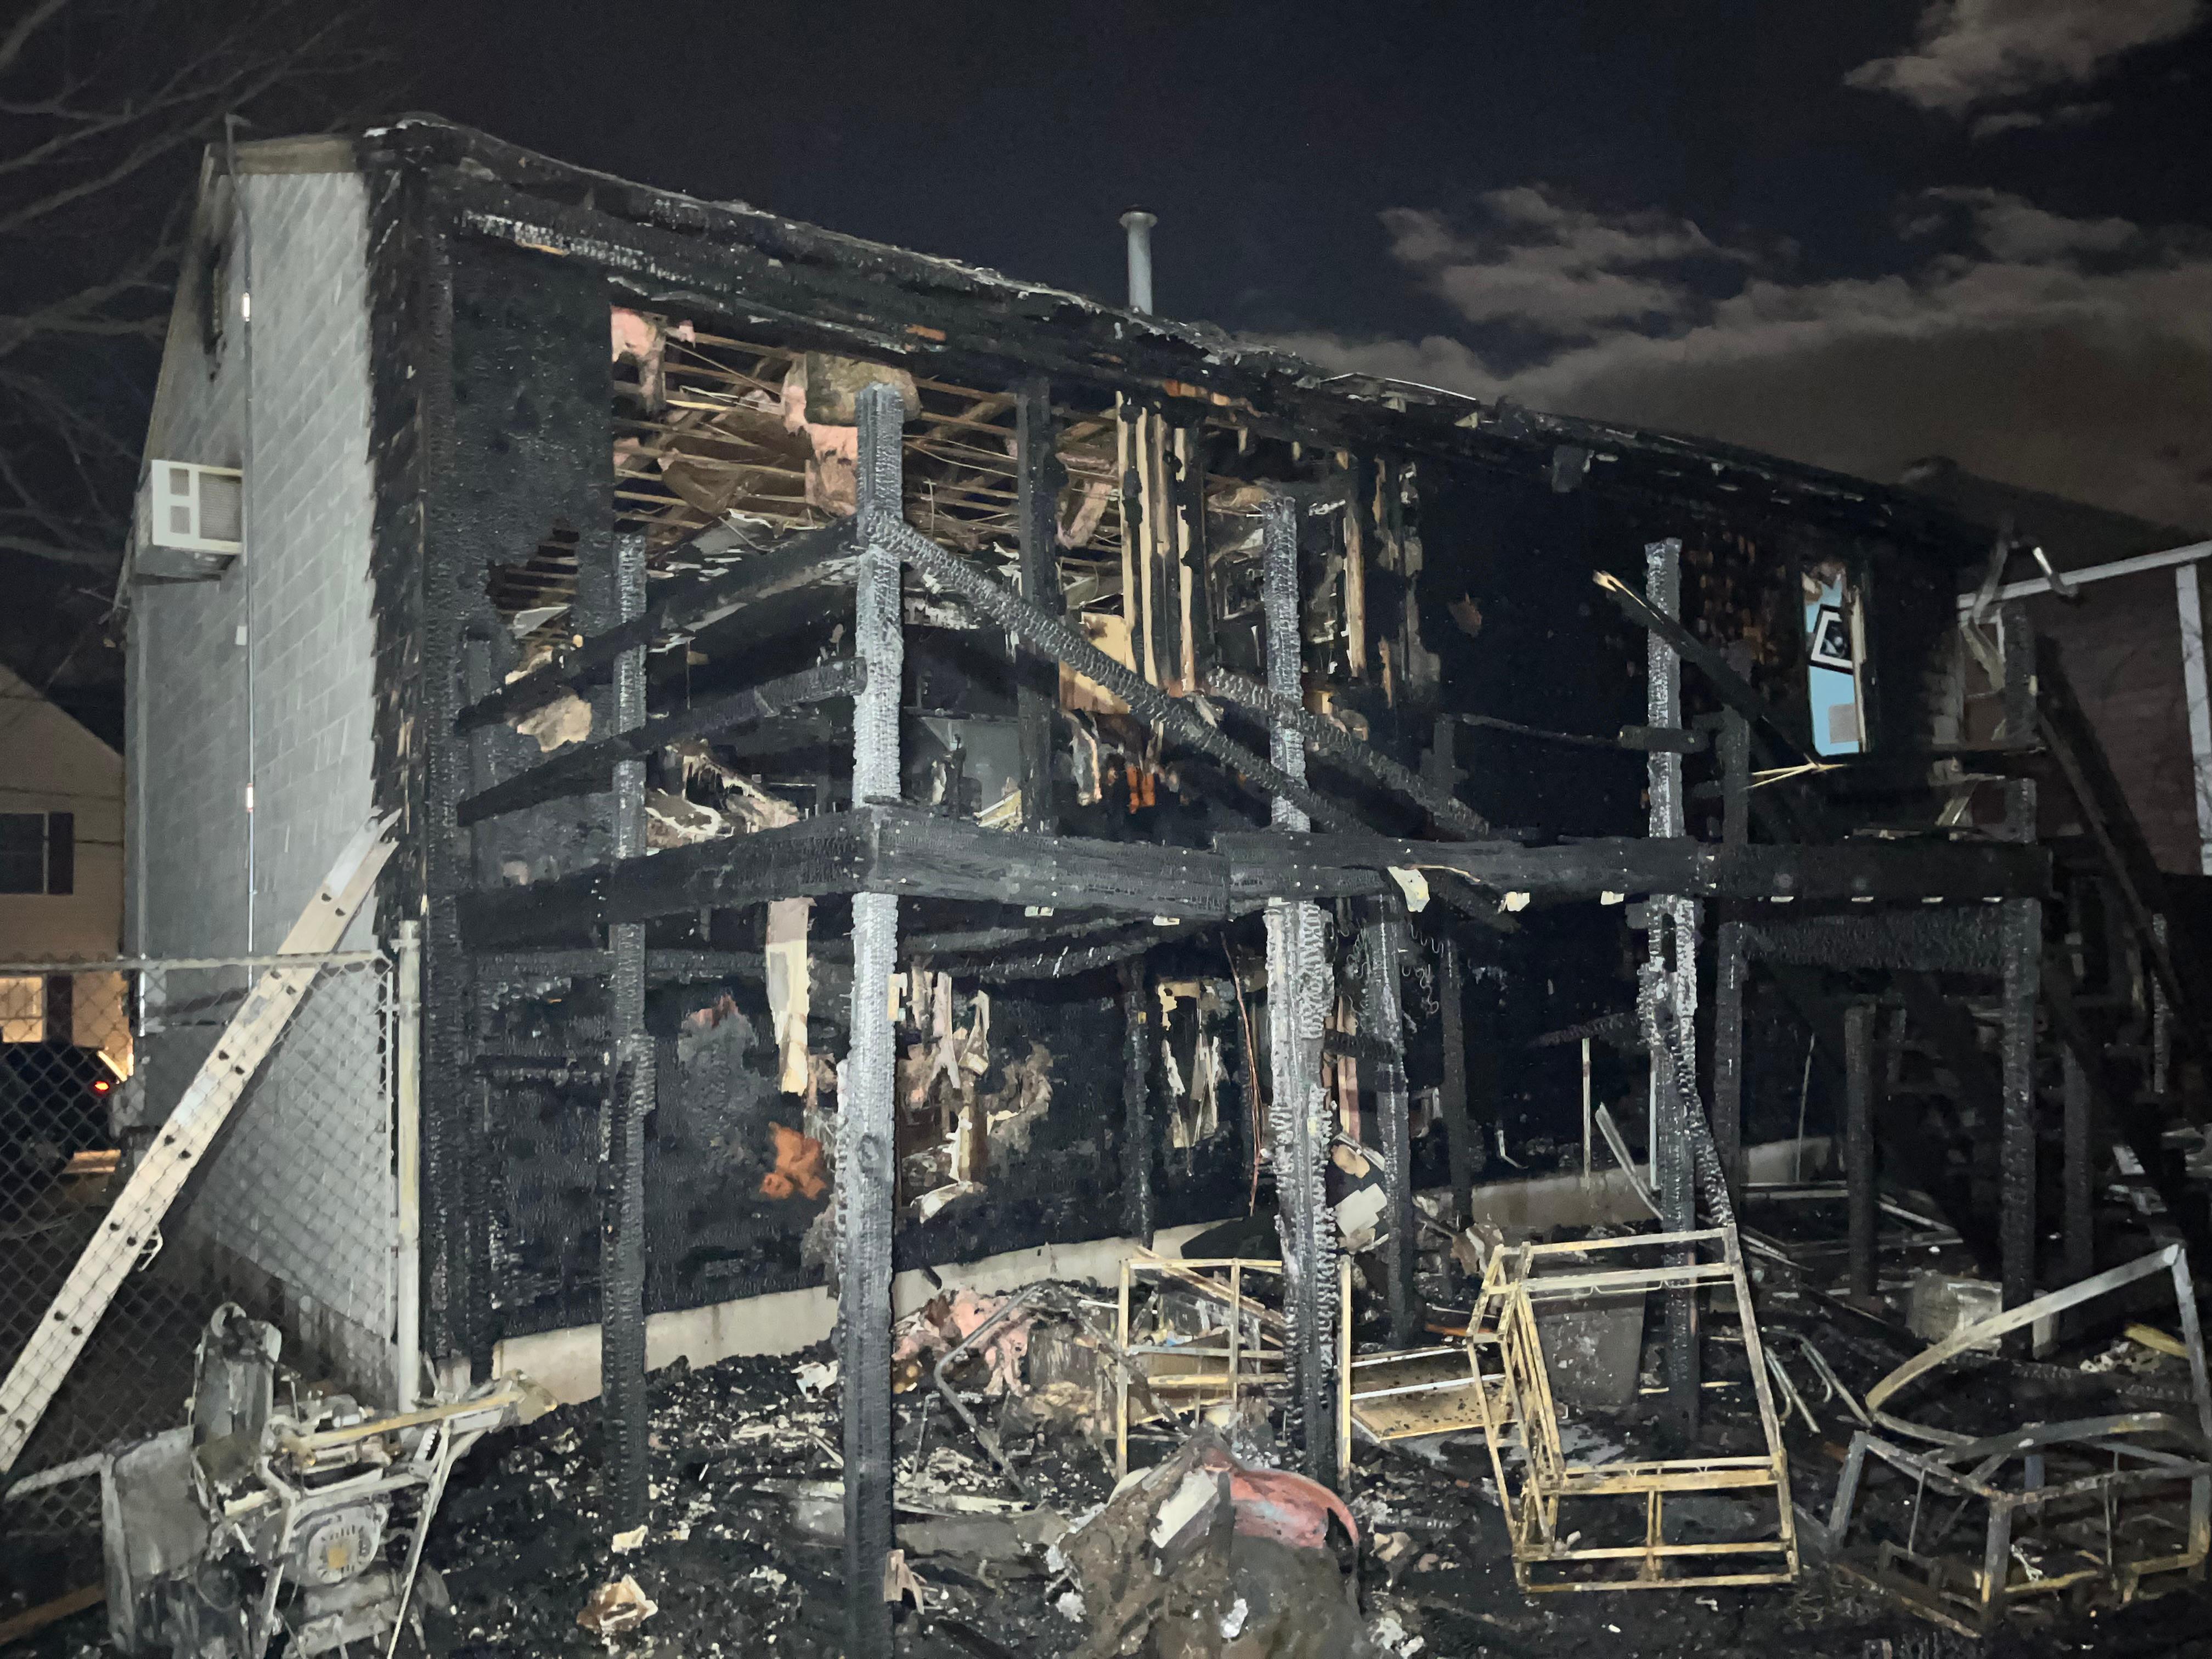 Fire is one of the most terrifying tragedies, and putting it out can be difficult. Our dedicated SERVRO of Providence team will take the stress out of restoration by carefully listening to your needs and remediating the fire damaged areas in a timely manner. Give us a call!